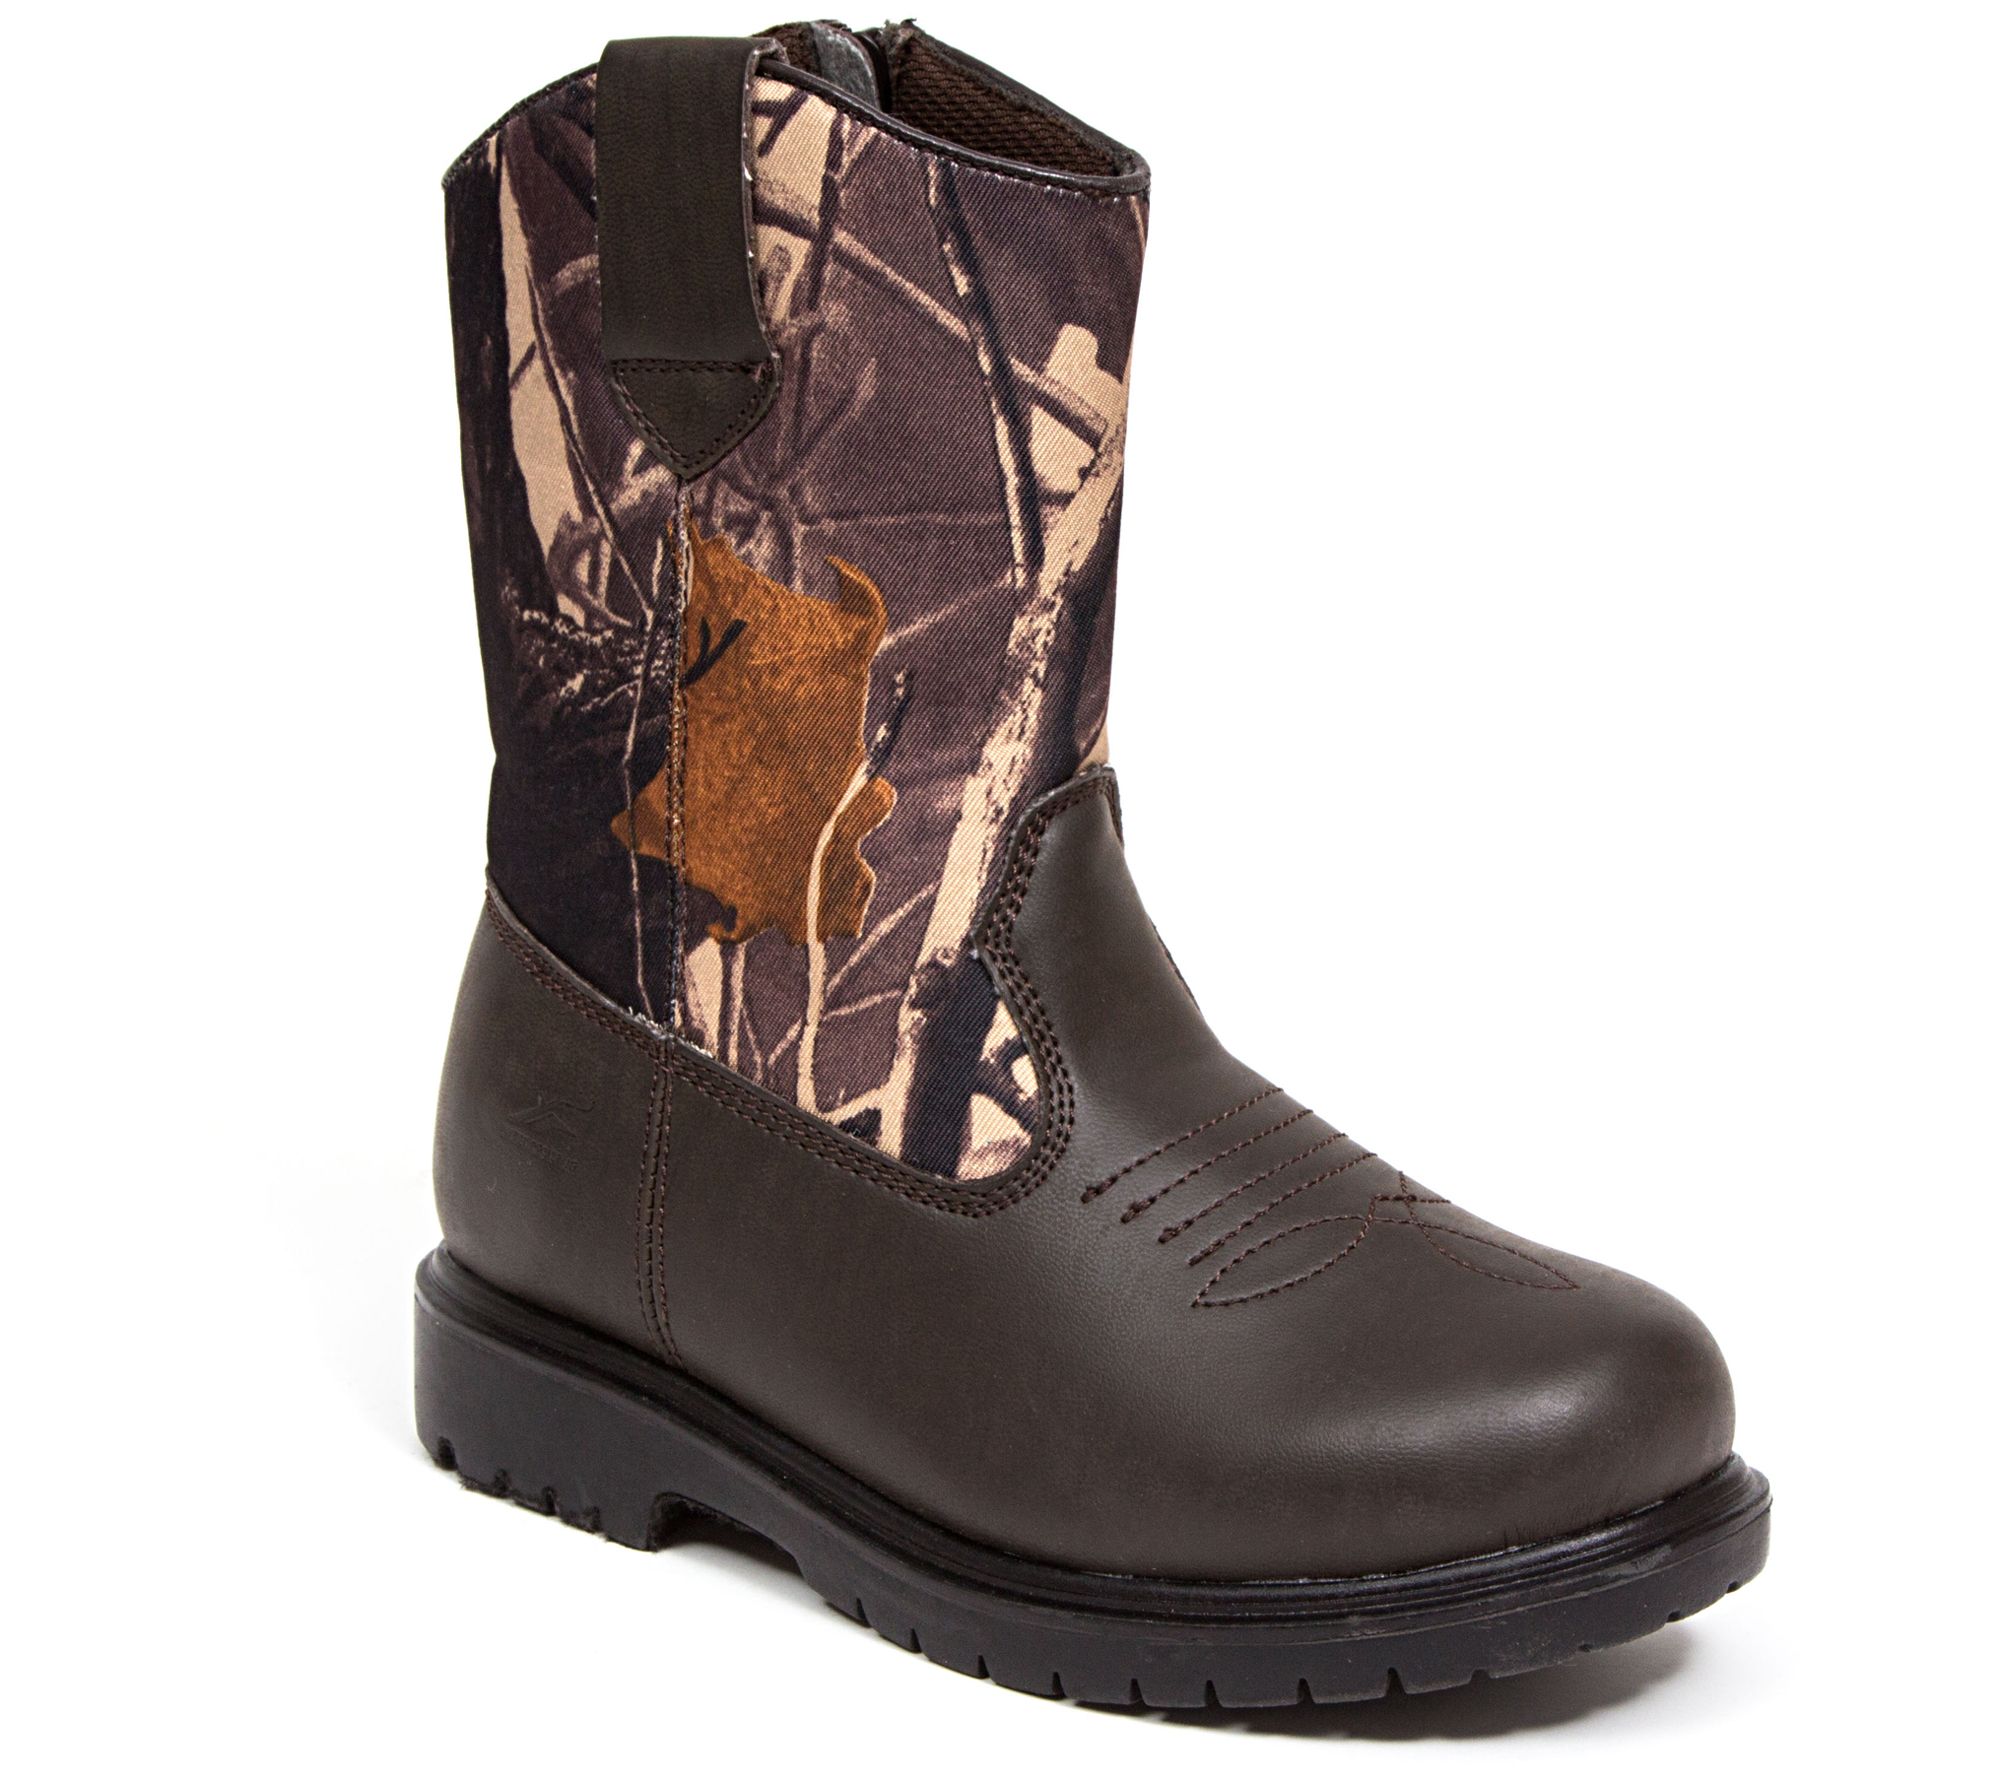 Deer Stags Boy's Thinsulate Water-Resistant Boots - Tour - QVC.com